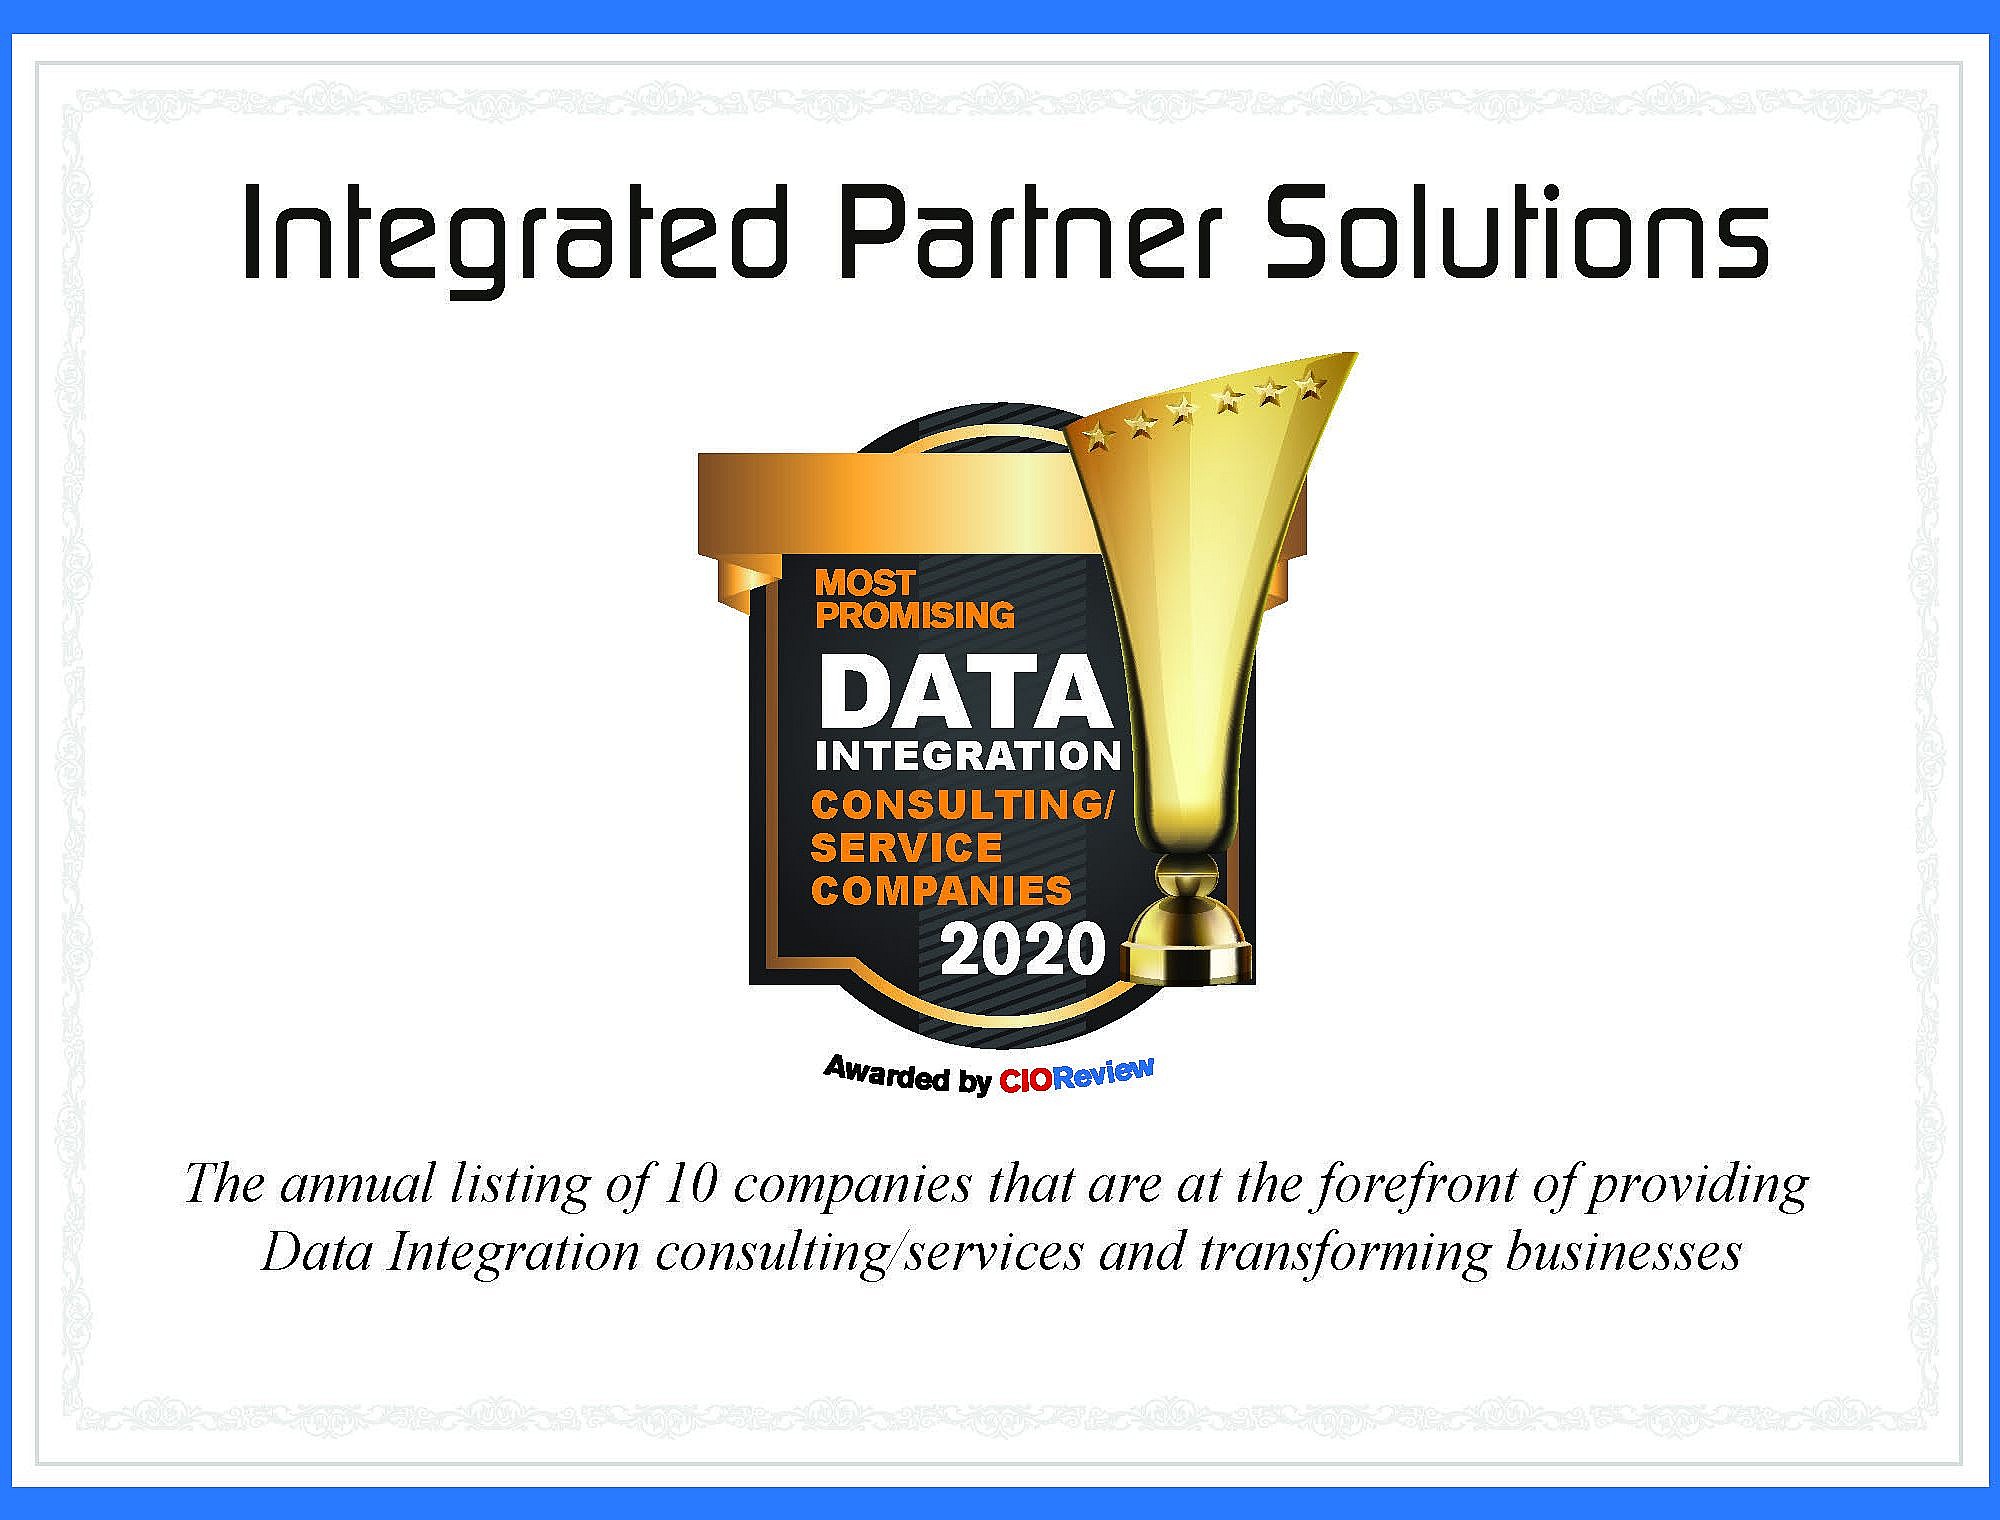 INTEGRATED PARTNER SOLUTIONS, INC.